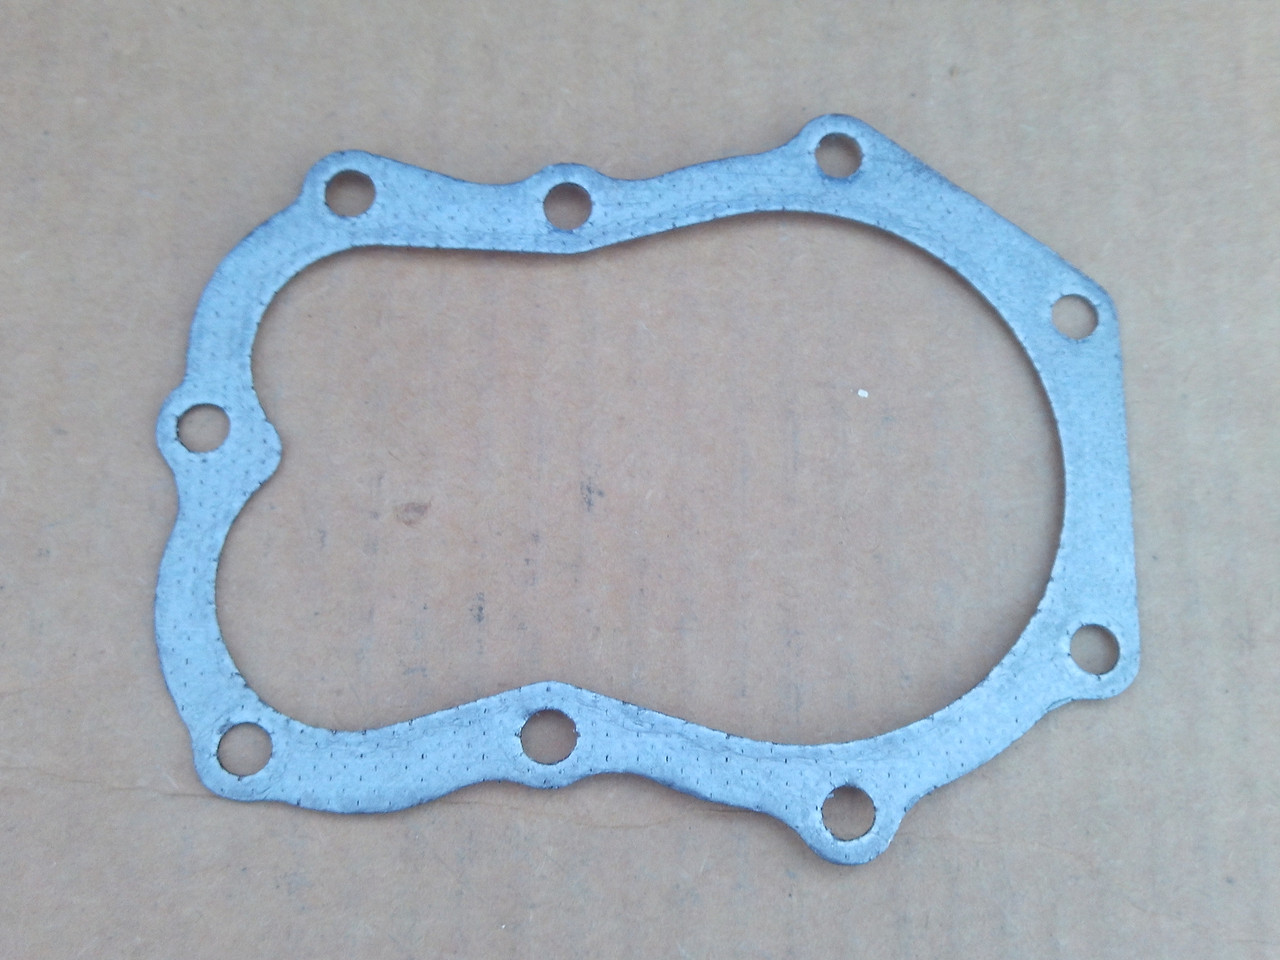 Head Gasket for Briggs and Stratton 270796, 271075, 271707, 271866, 271866S, 4125, 220400 to 222400, 252400 to 252700, 257700, 280700 to 286700 &